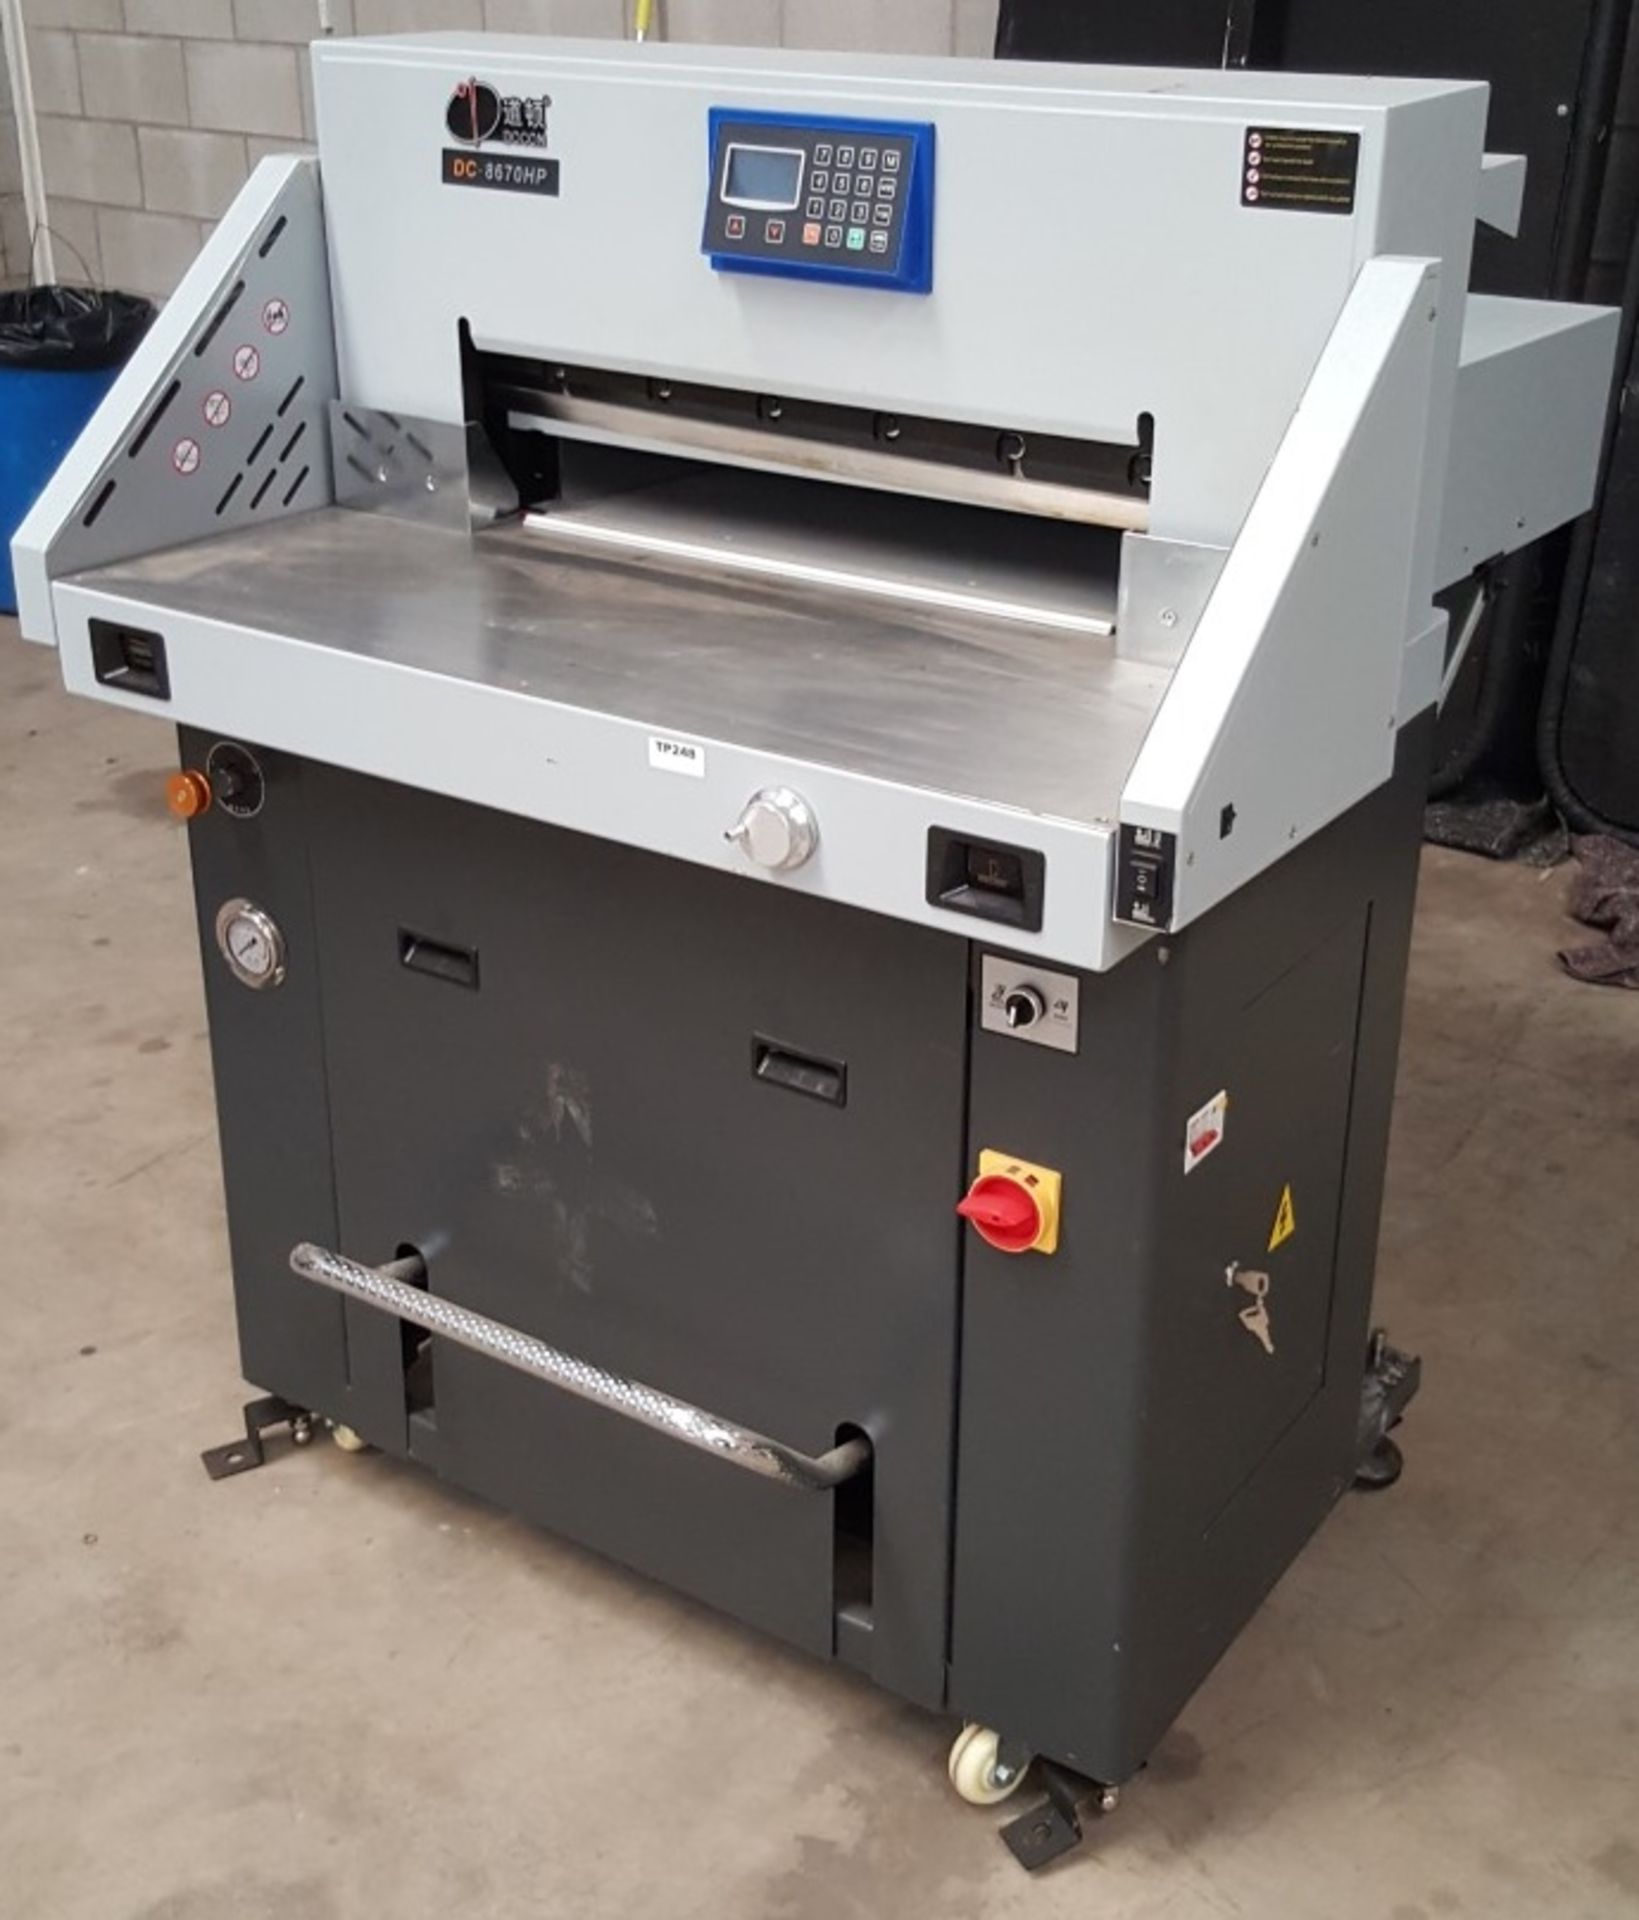 1 x Docon DC-8670HP Hydraulic Paper Guillotine - Heavy Duty Paper Cutting Machine - Image 2 of 10